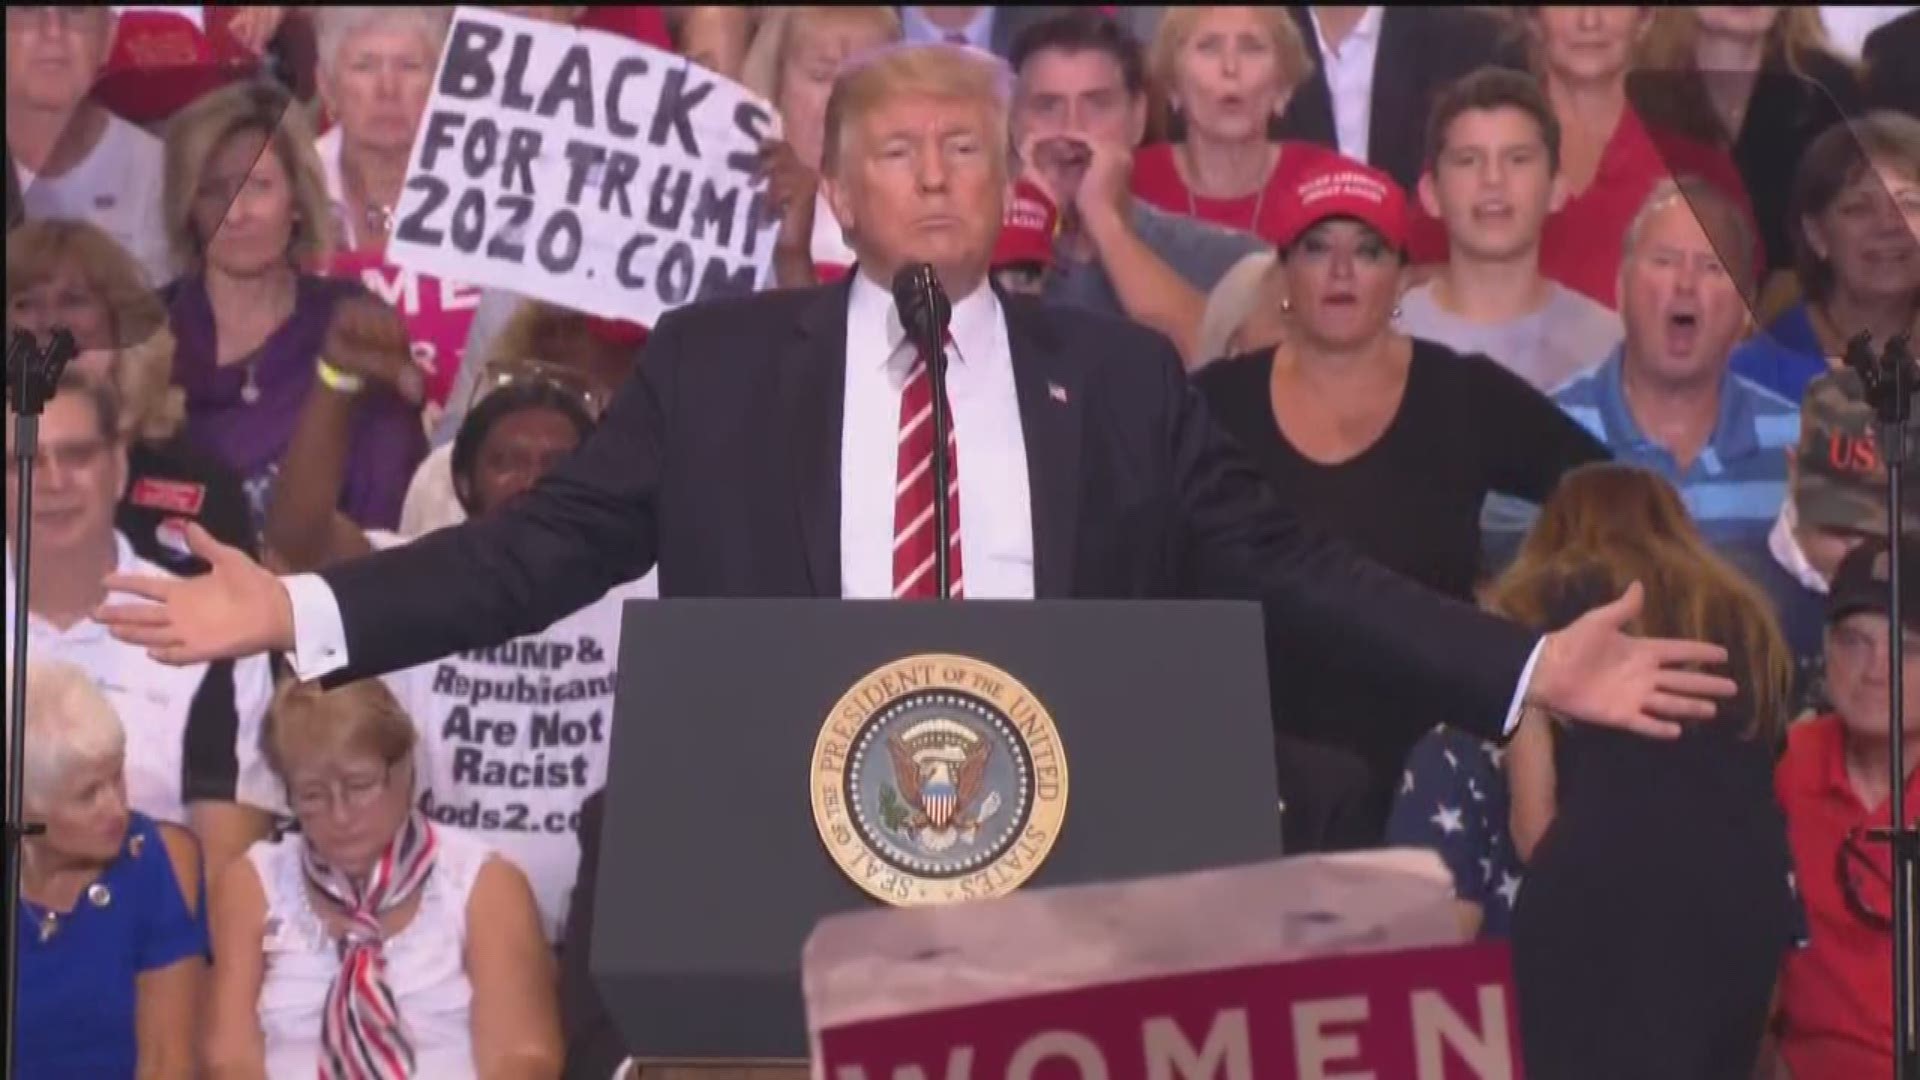 Without mentioning names, Trump criticized Arizona senators and commented on Phoenix rally crowd.